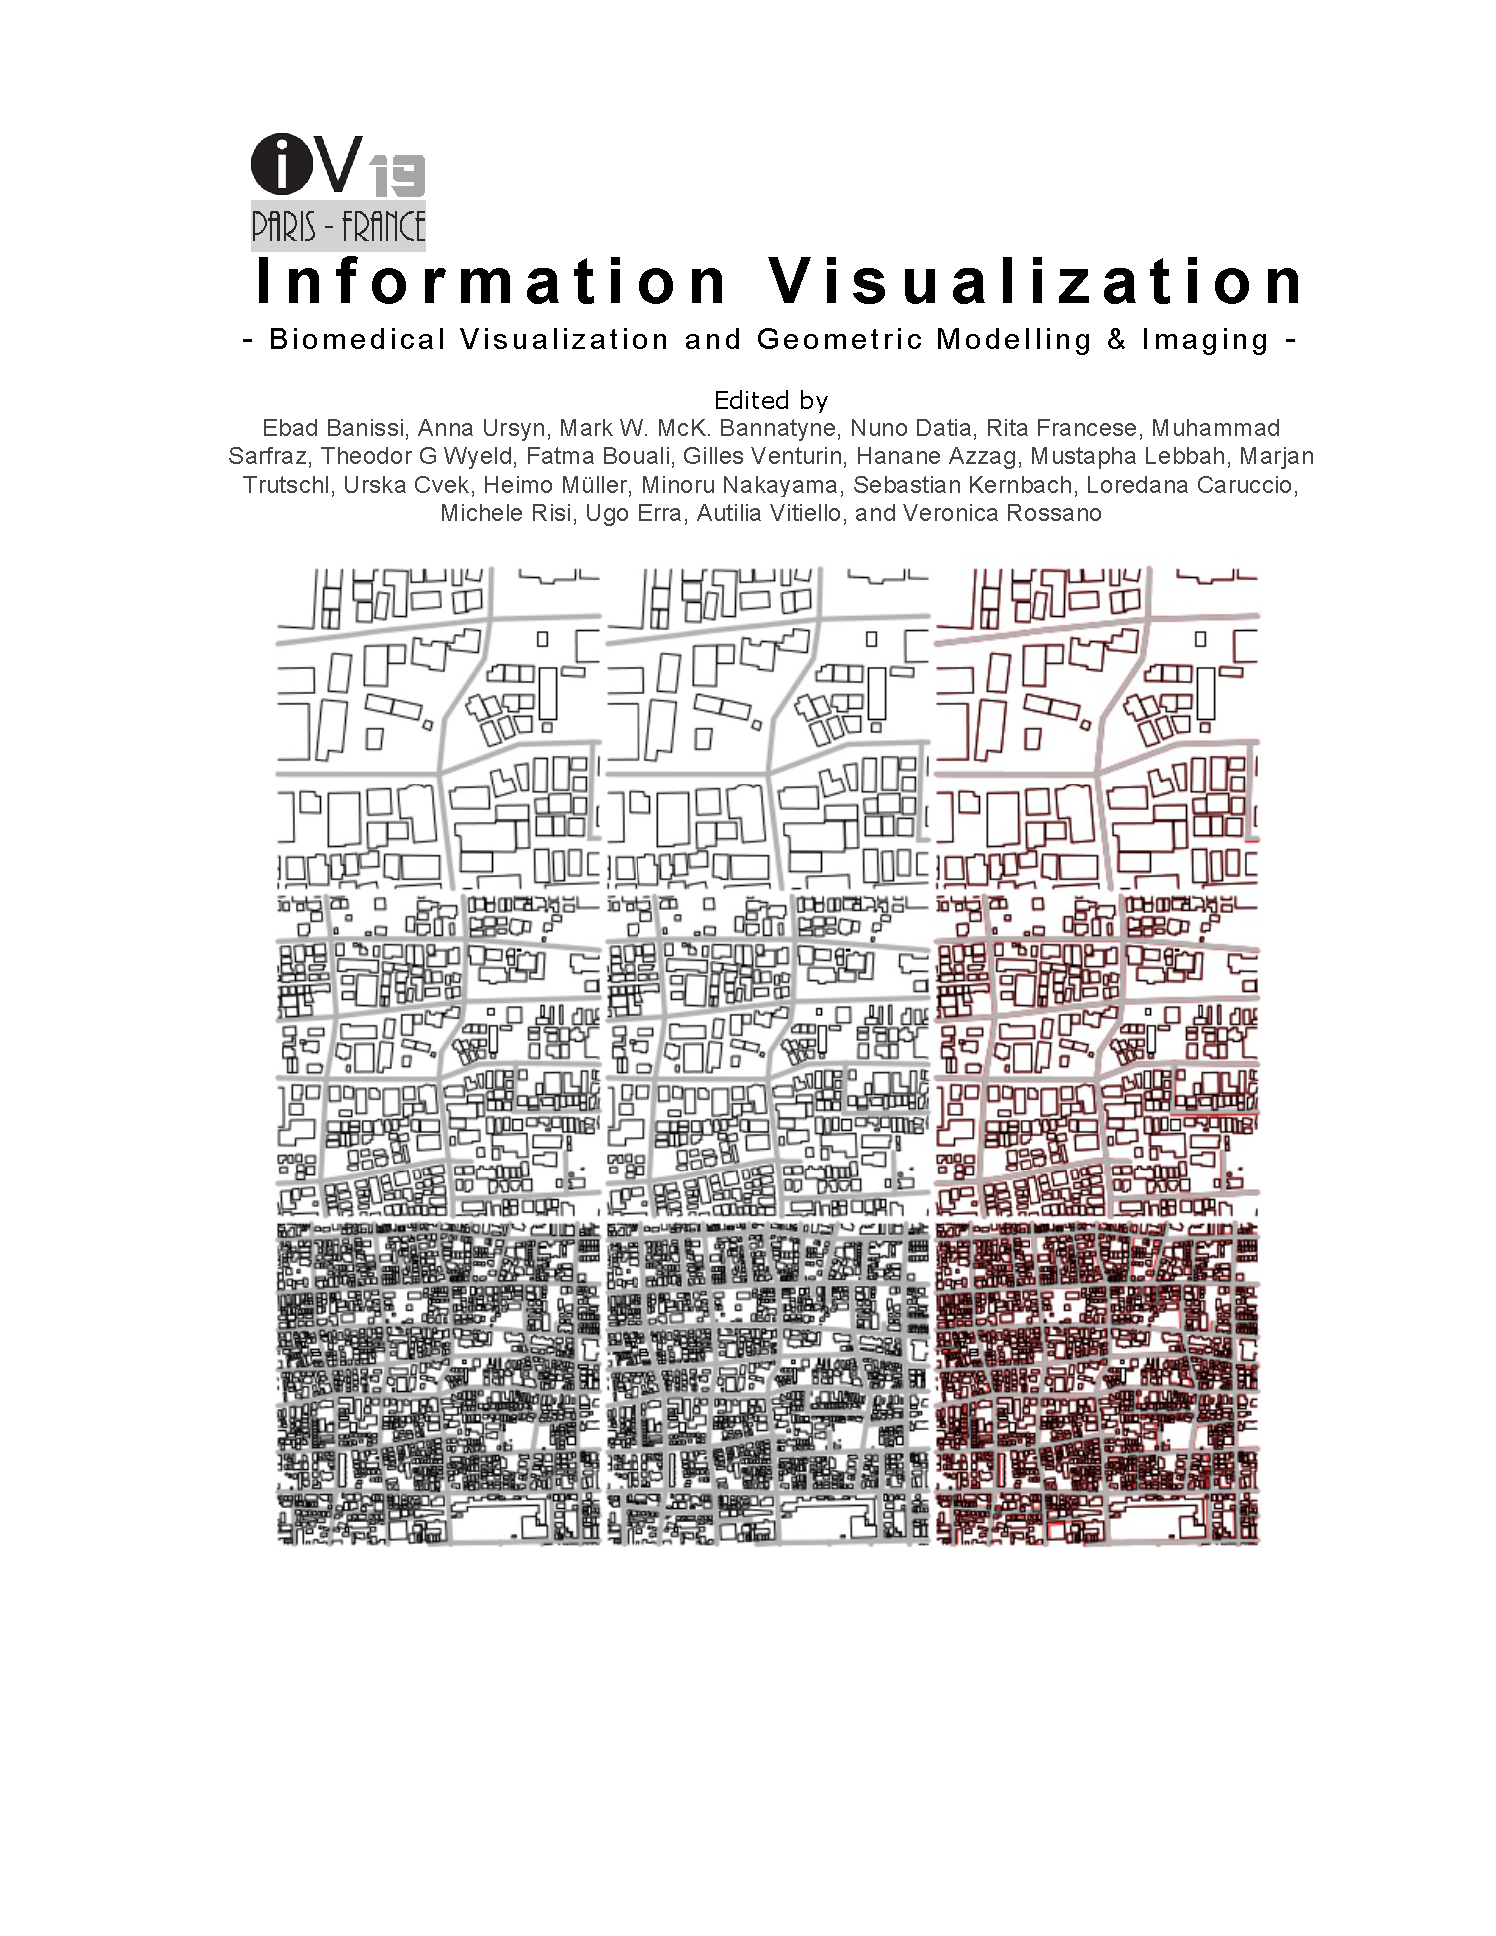 Visual Analytics for Analyzing Technological Trends from Text